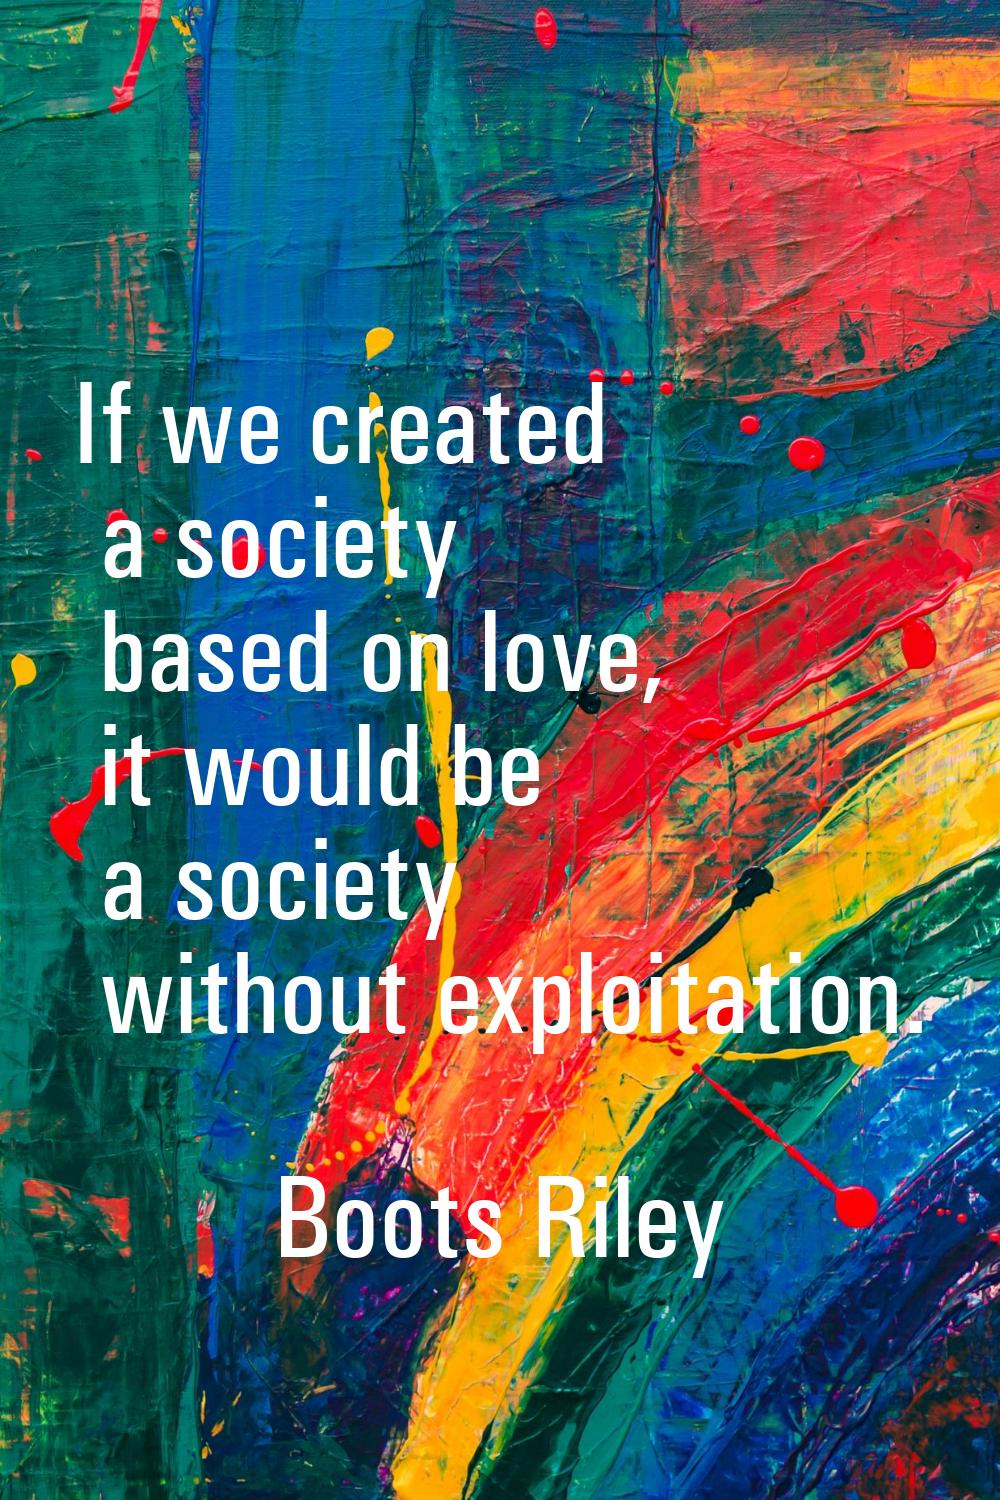 If we created a society based on love, it would be a society without exploitation.